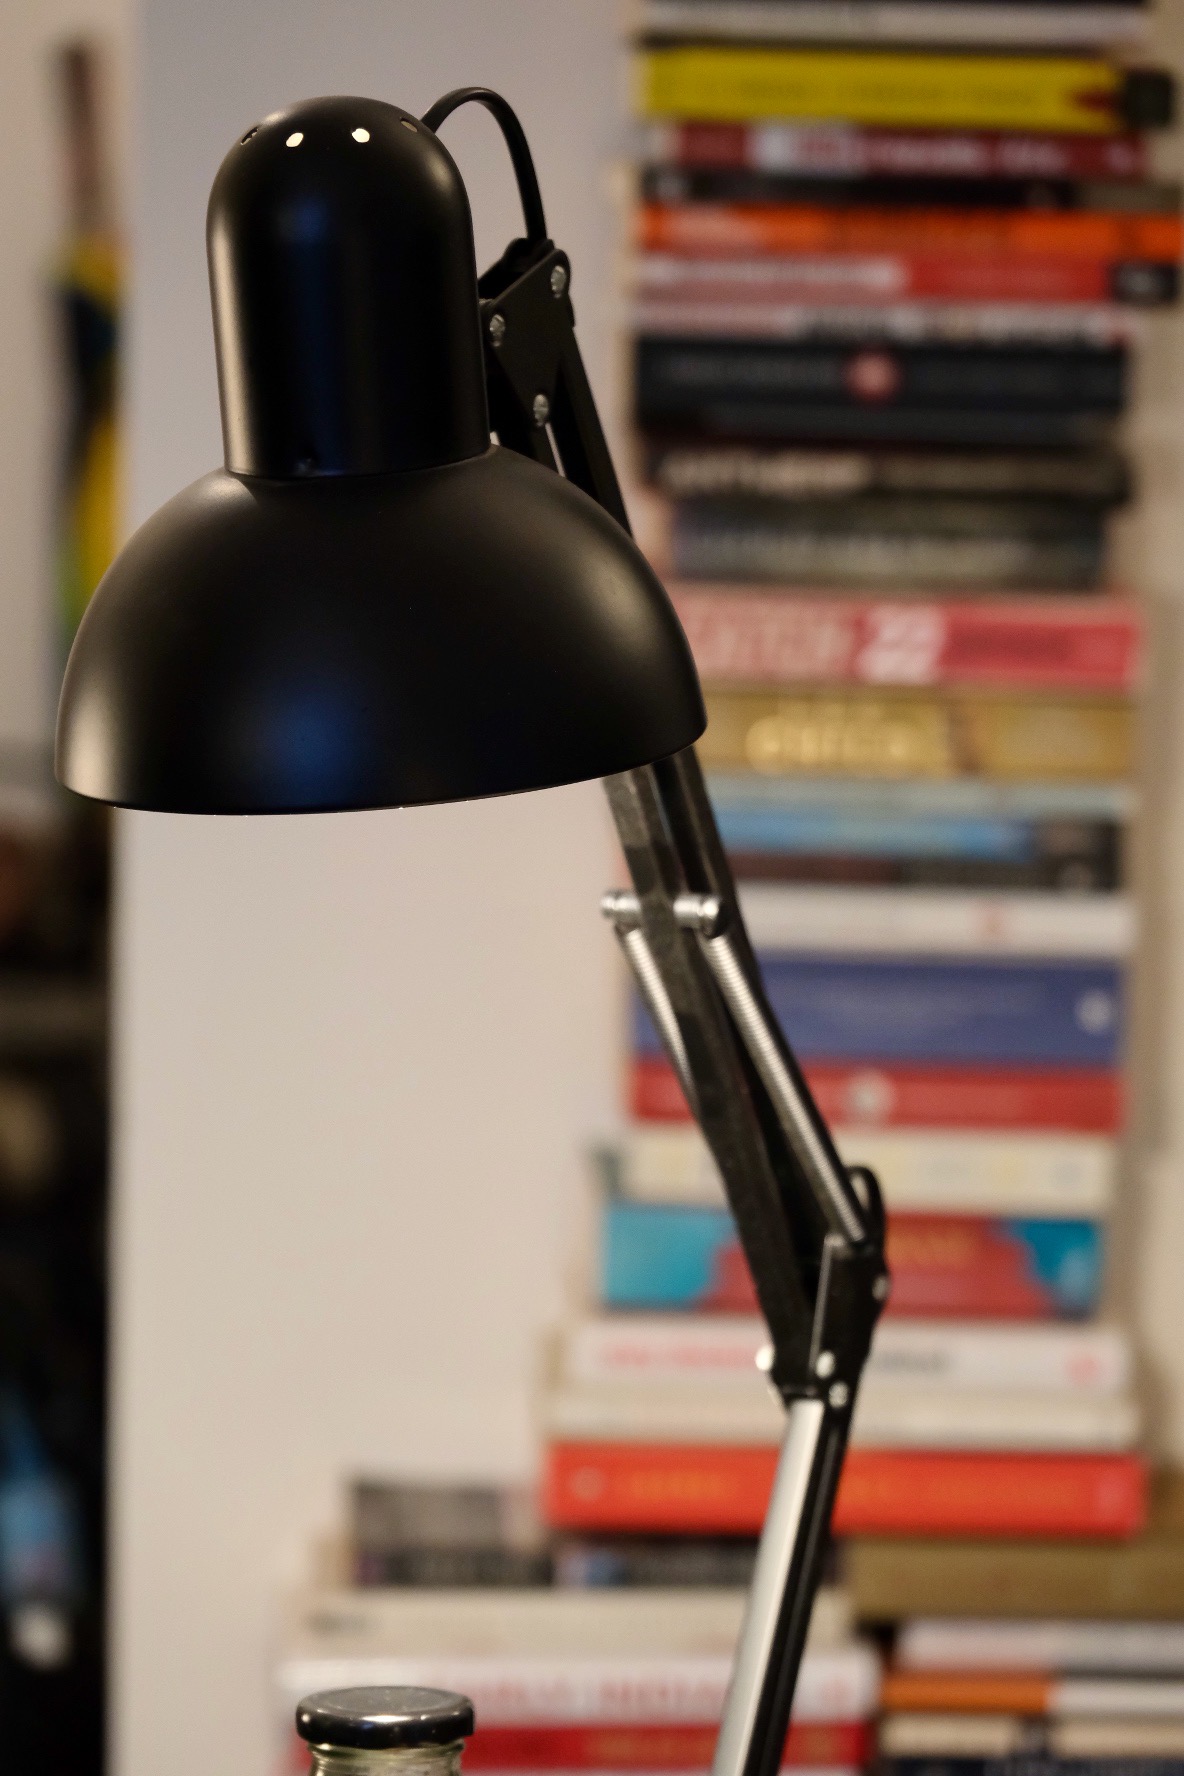 A swing-arm lamp shown in close-up with a pile of books in the background.